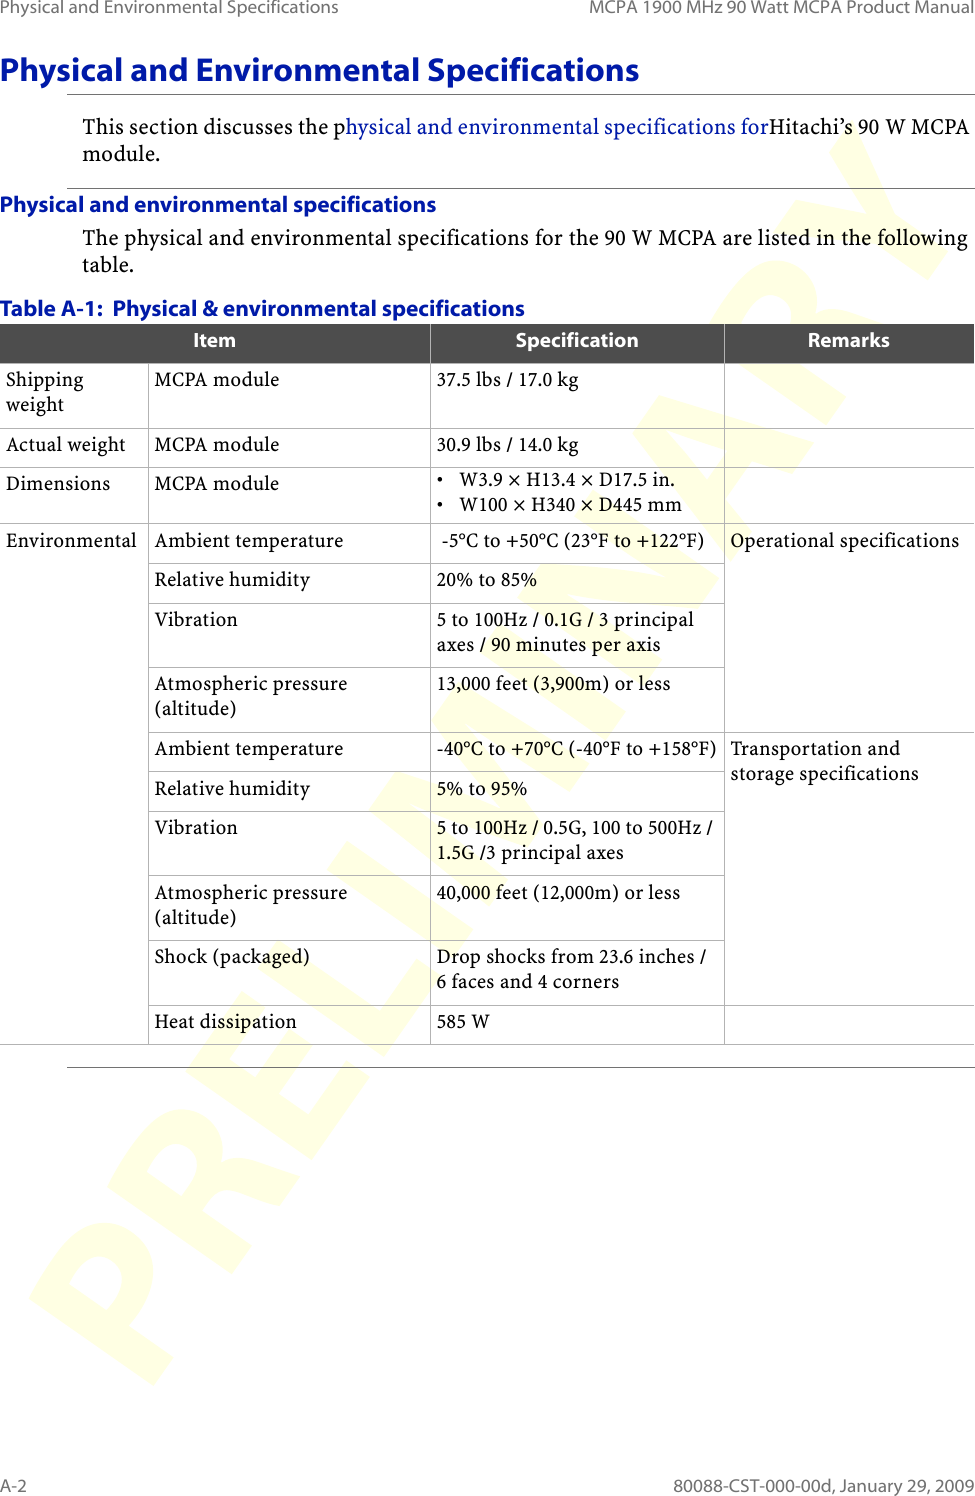 Physical and Environmental Specifications MCPA 1900 MHz 90 Watt MCPA Product ManualA-2 80088-CST-000-00d, January 29, 2009Physical and Environmental SpecificationsThis section discusses the physical and environmental specifications forHitachi’s 90 W MCPA module.Physical and environmental specificationsThe physical and environmental specifications for the 90 W MCPA are listed in the following table. Table A-1:  Physical &amp; environmental specifications  Item Specification RemarksShipping weightMCPA module 37.5 lbs / 17.0 kgActual weight MCPA module 30.9 lbs / 14.0 kgDimensions MCPA module  • W3.9 × H13.4 × D17.5 in.• W100 × H340 × D445 mm Environmental Ambient temperature  -5°C to +50°C (23°F to +122°F) Operational specificationsRelative humidity 20% to 85% Vibration 5 to 100Hz / 0.1G / 3 principal axes / 90 minutes per axisAtmospheric pressure (altitude) 13,000 feet (3,900m) or lessAmbient temperature  -40°C to +70°C (-40°F to +158°F) Transportation and storage specificationsRelative humidity 5% to 95% Vibration  5 to 100Hz / 0.5G, 100 to 500Hz / 1.5G /3 principal axesAtmospheric pressure (altitude) 40,000 feet (12,000m) or lessShock (packaged)  Drop shocks from 23.6 inches / 6 faces and 4 corners Heat dissipation 585 W